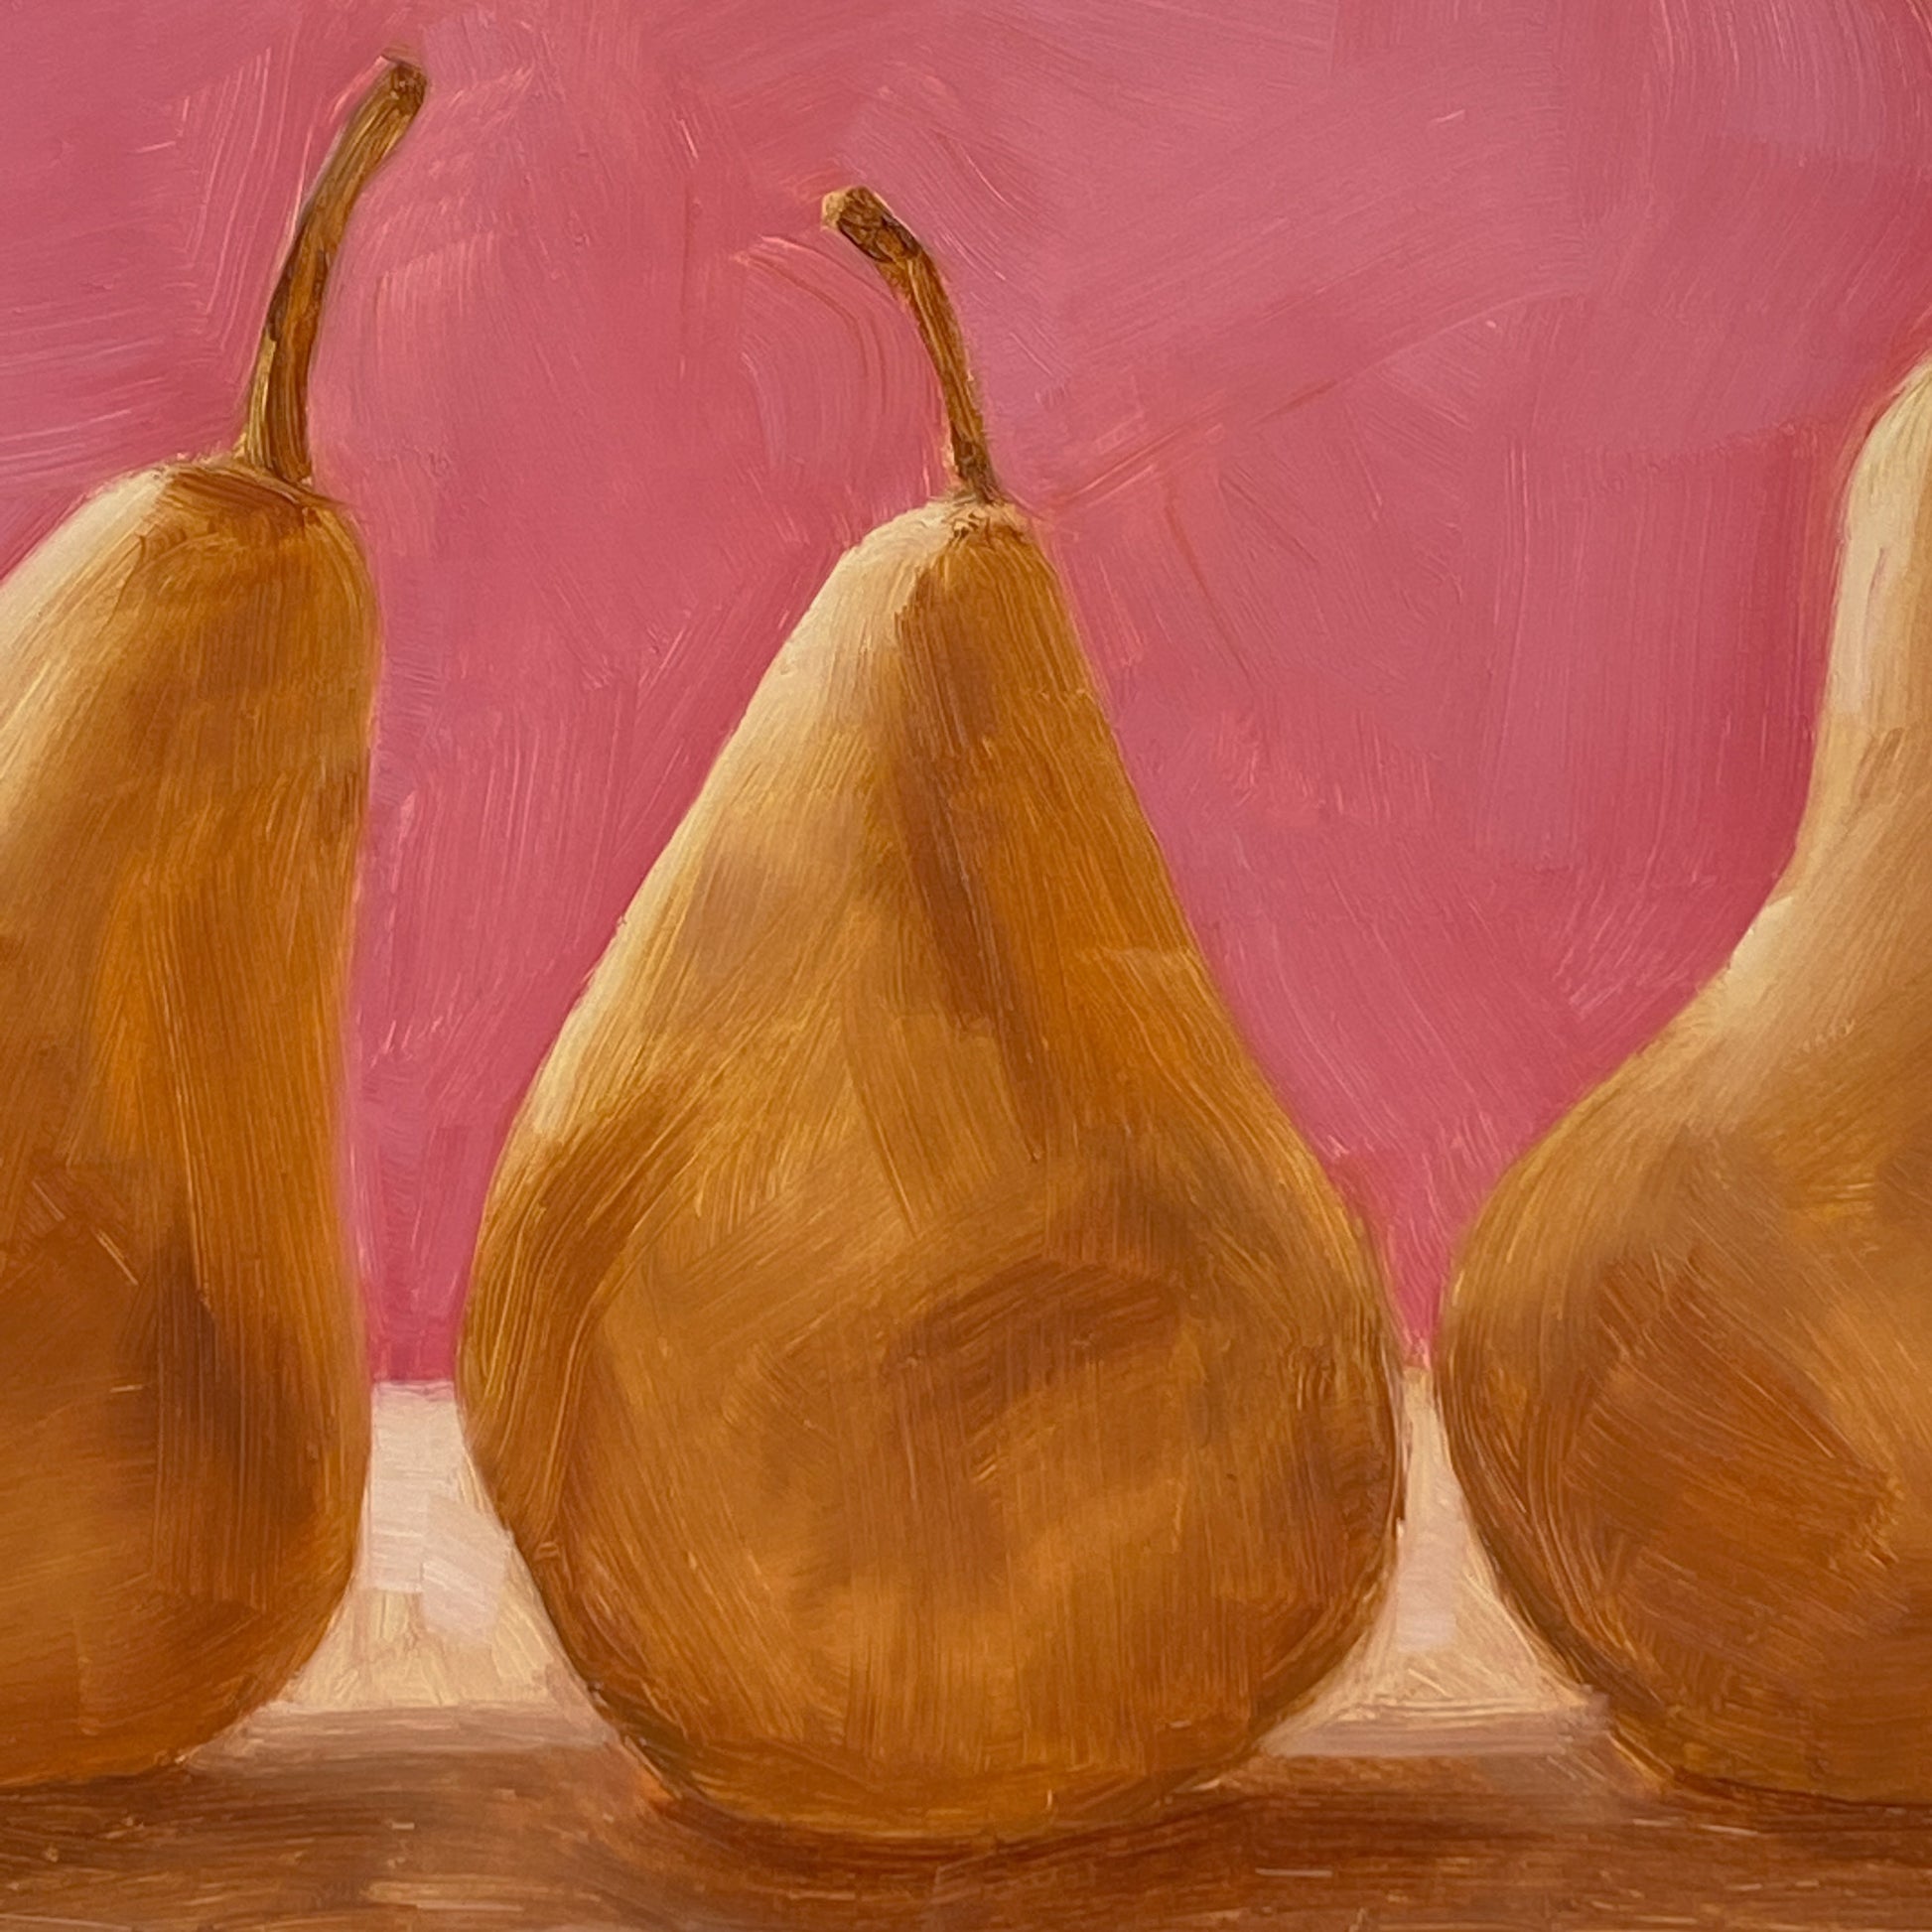 closeup of an original oil paintings of three beurre Bosc pears on a warm pink and creamy background